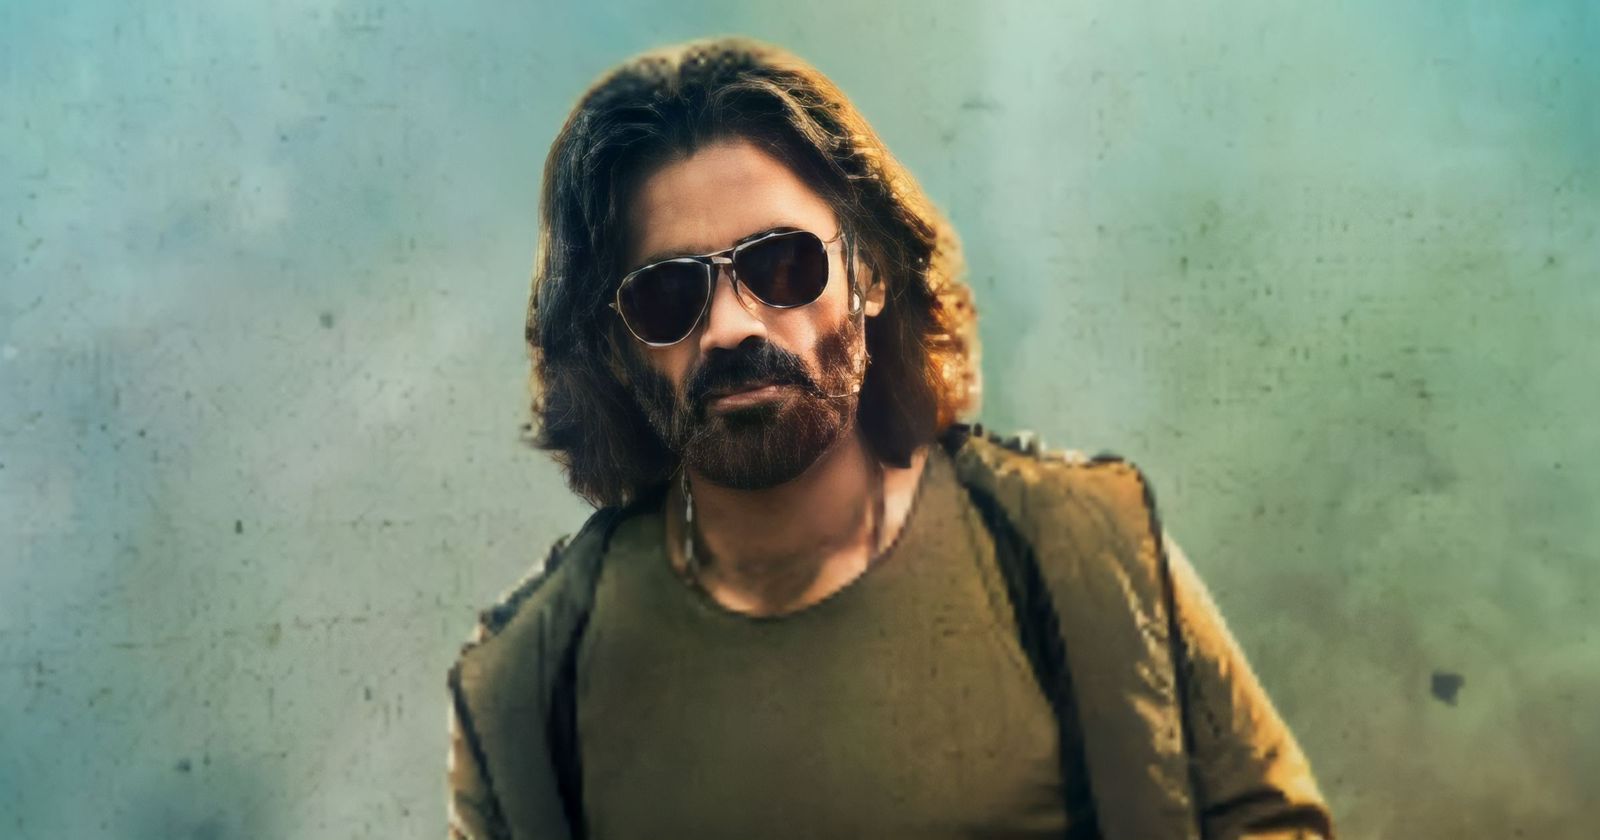 Hunter Trailer: Suniel Shetty In His Action Avatar Will Keep You Glued To This Thriller Series